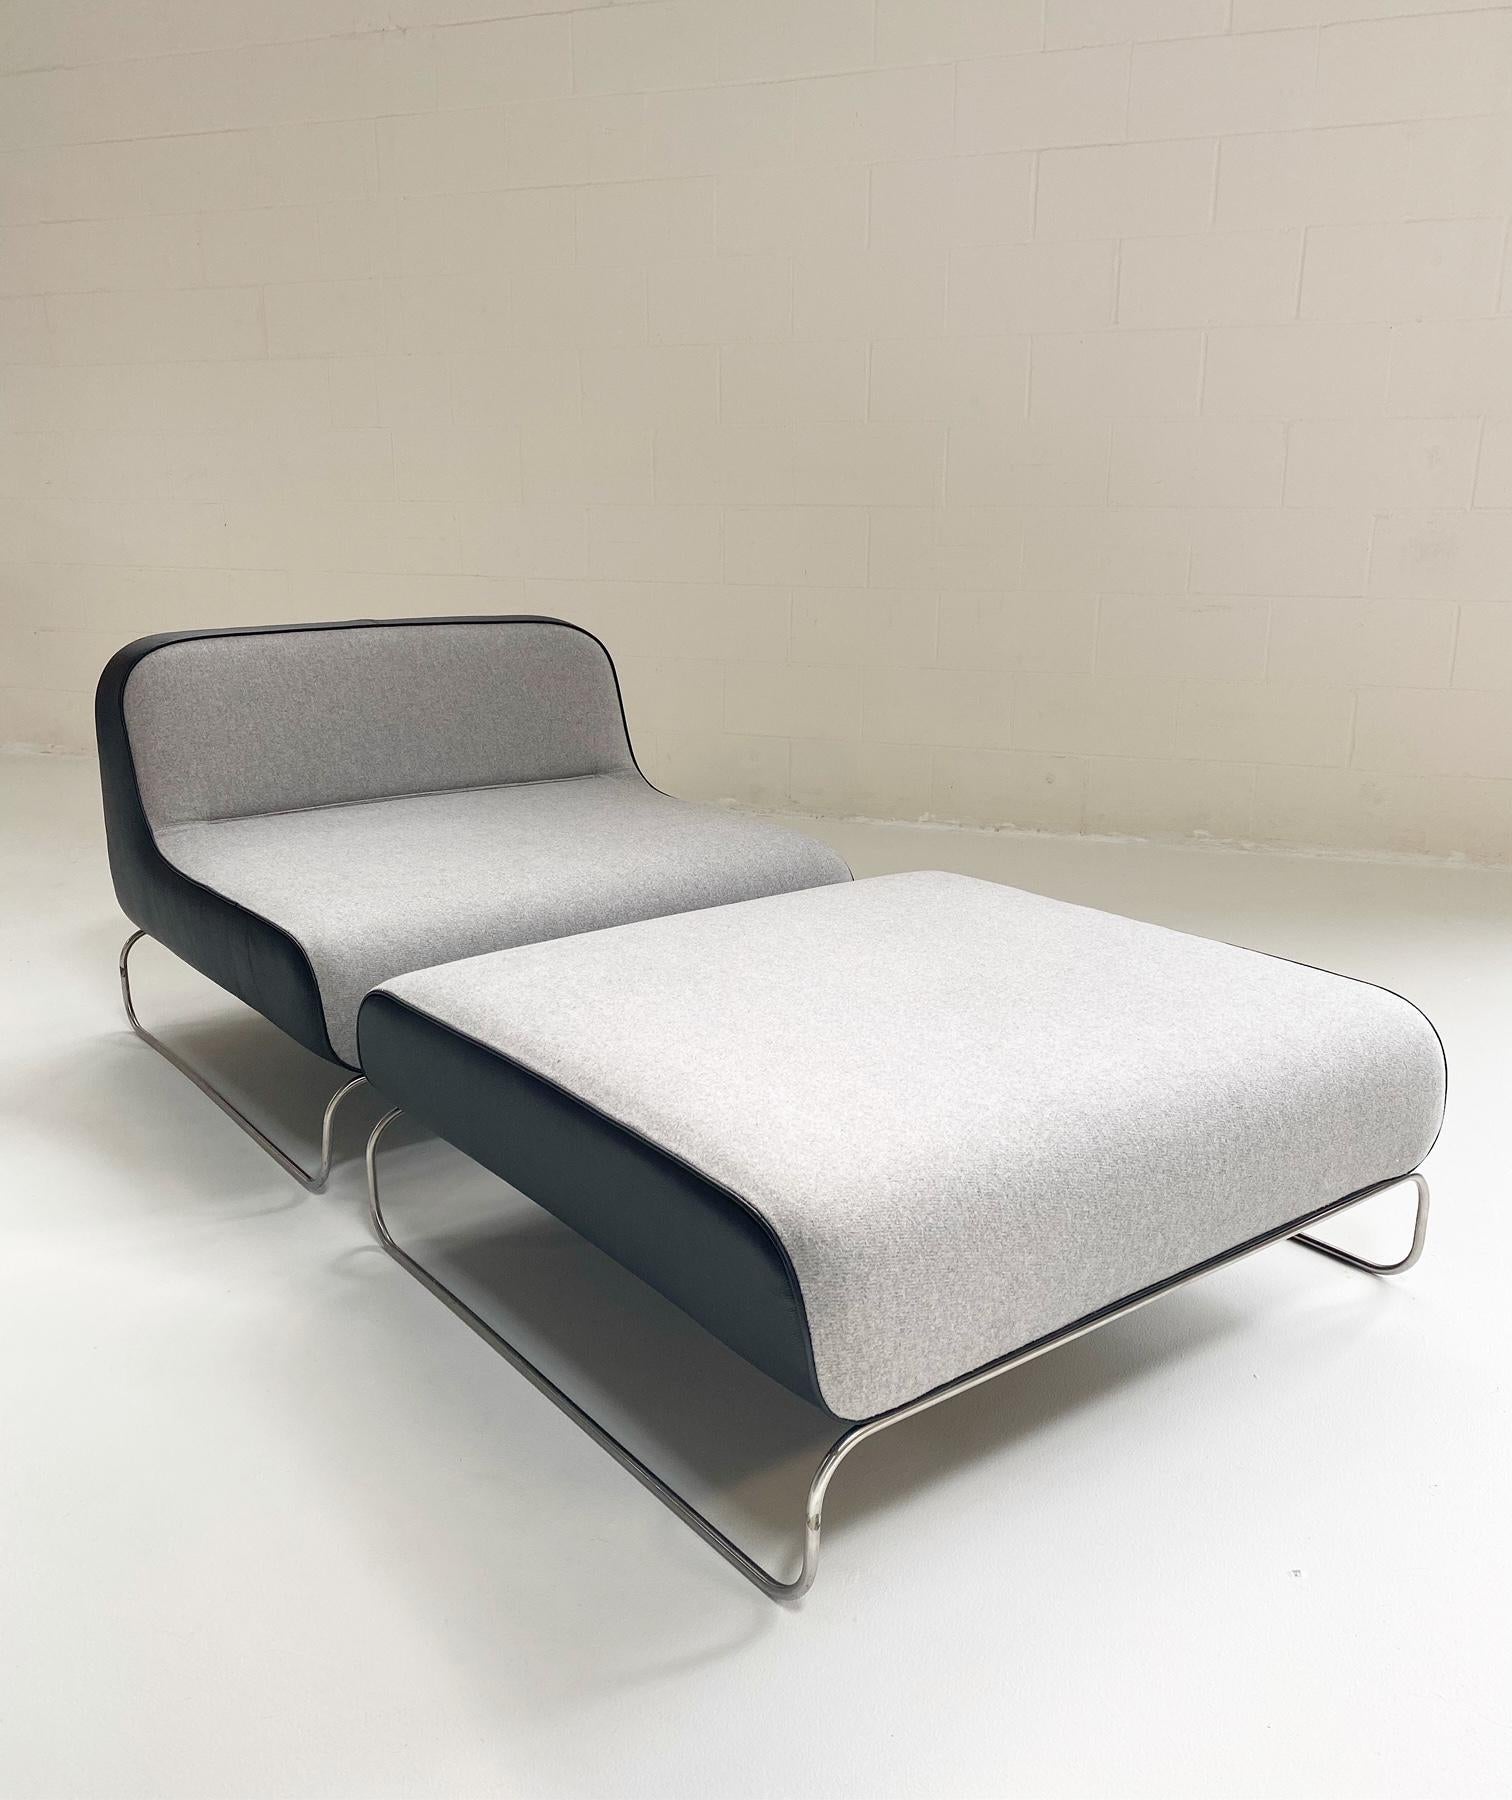 Piero Lissoni is an Italian architect and designer well known for his wide and low contemporary furniture designs. We love this set! It's the perfect deep lounge for napping, reading, or just plain loungin. The original upholstery had contrasting